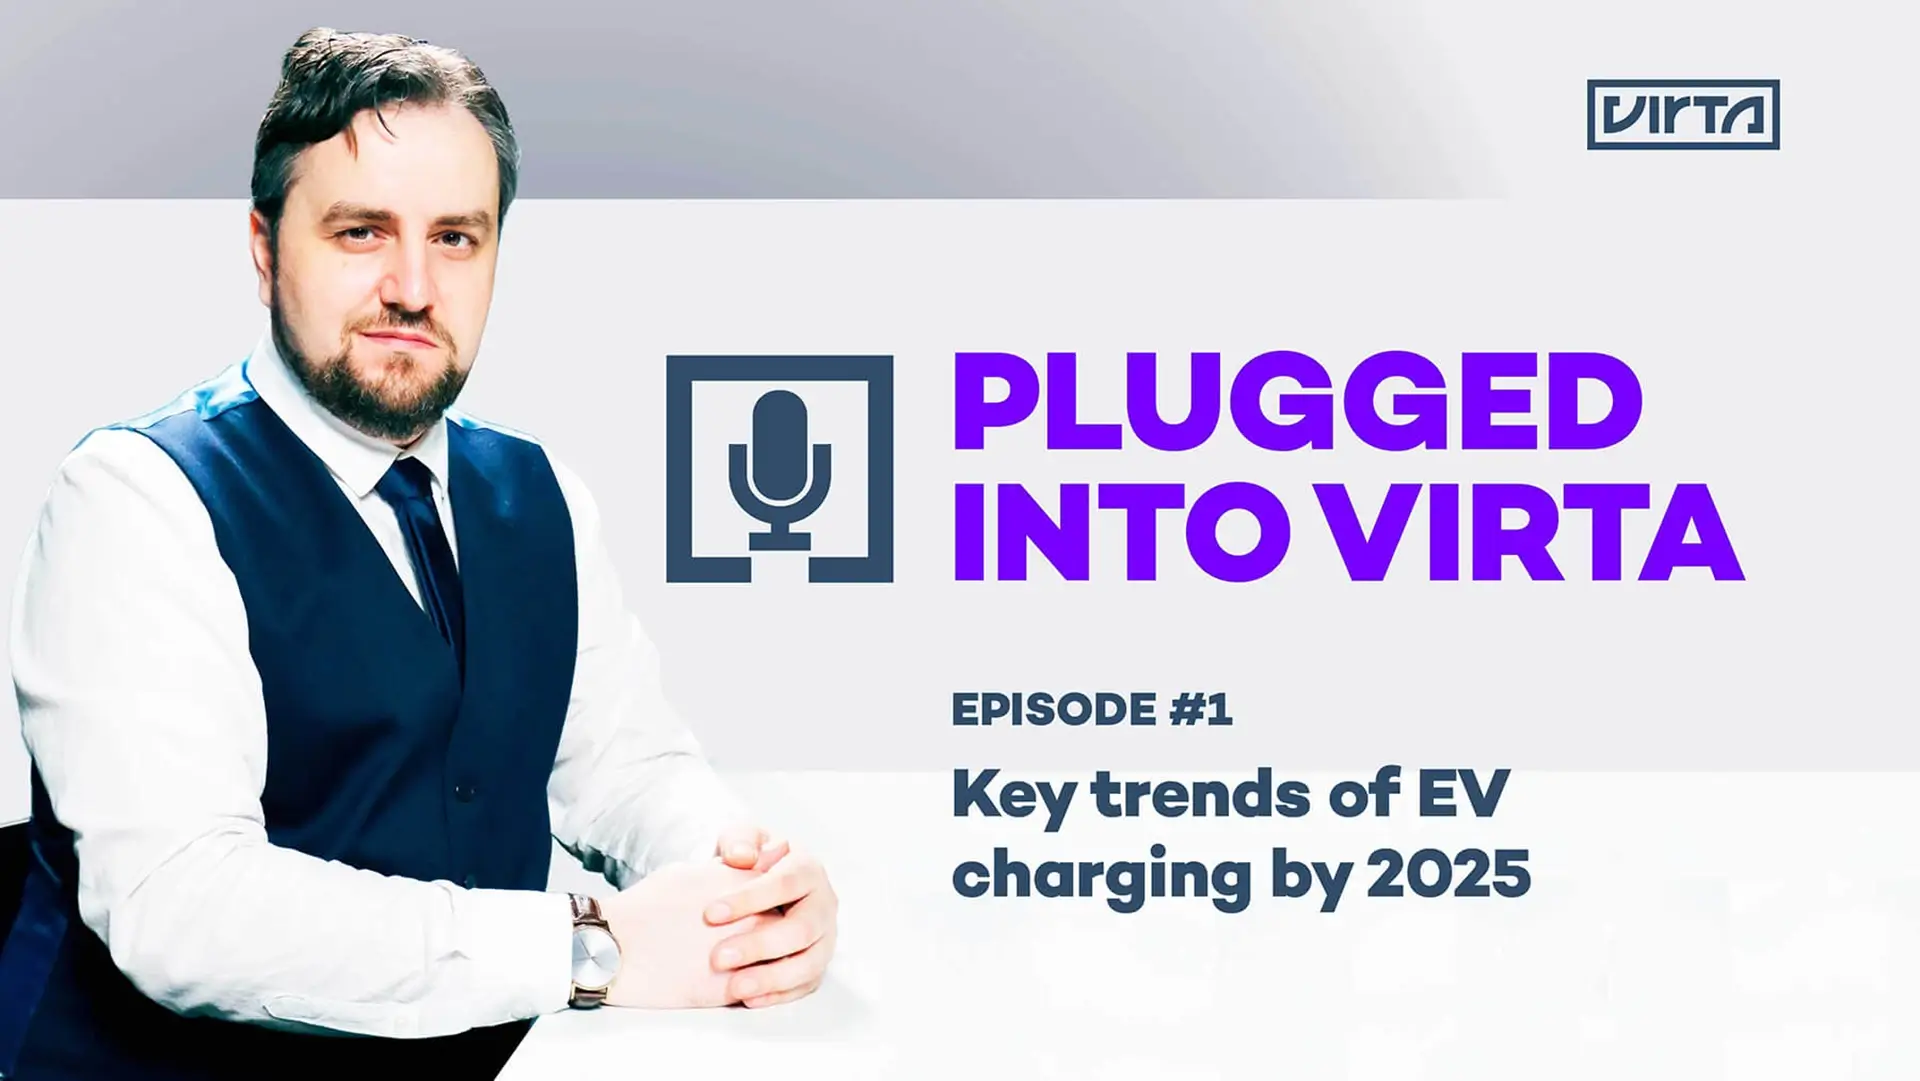 Plugged into Virta Episode 1 Key trends of EV charging by 2025